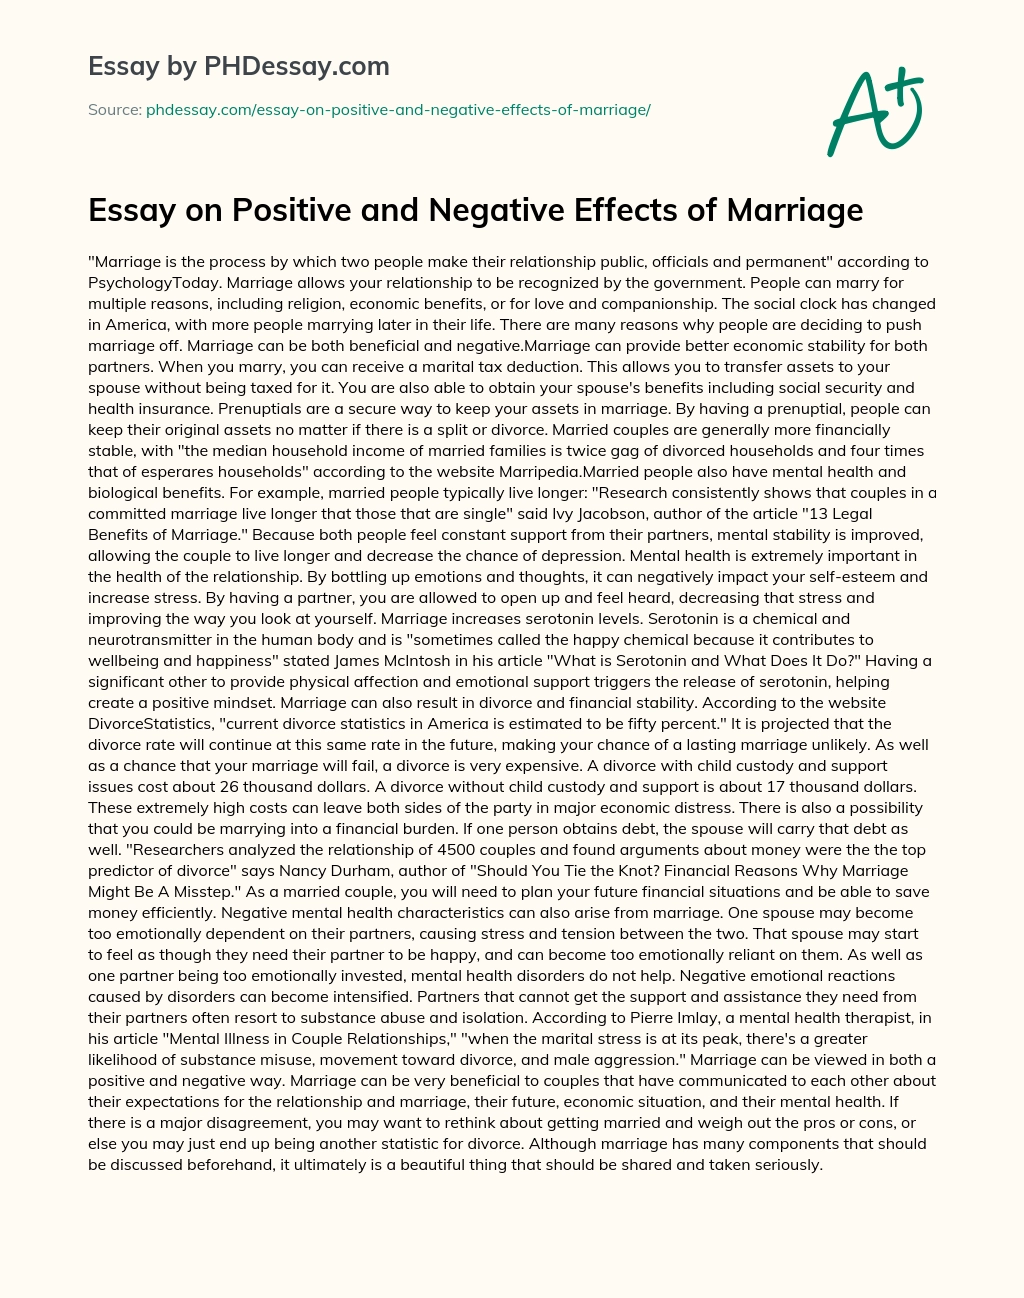 Essay on Positive and Negative Effects of Marriage essay